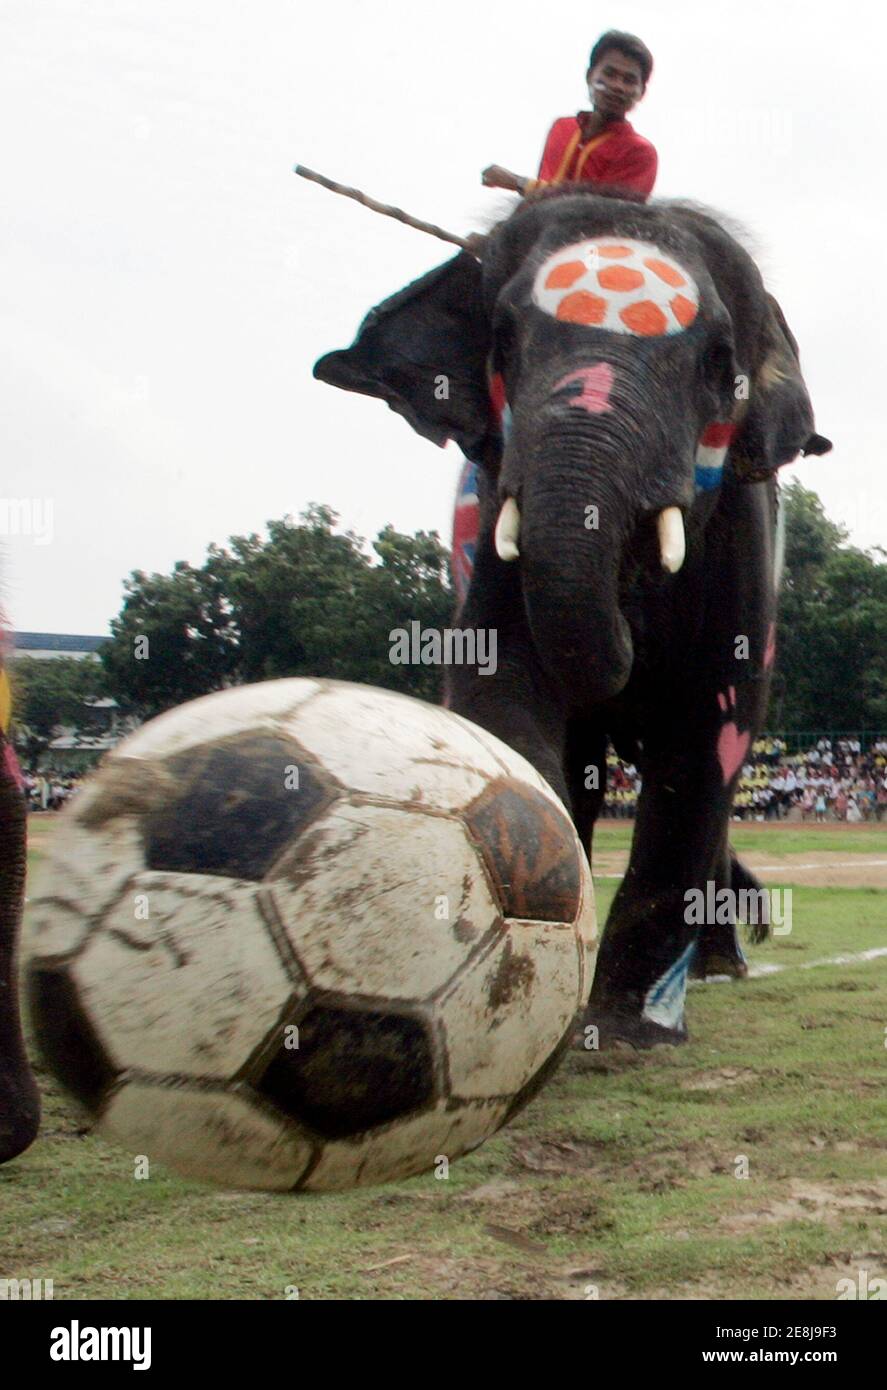 An elephant plays soccer with Thai students in Ayutthaya province, 80 km (50 miles) north of Bangkok, Thailand June 22, 2006. The match was held to campaign against the soccer-gambling during World Cup 2006. REUTERS/Chaiwat Subprasom (THAILAND) Stock Photo